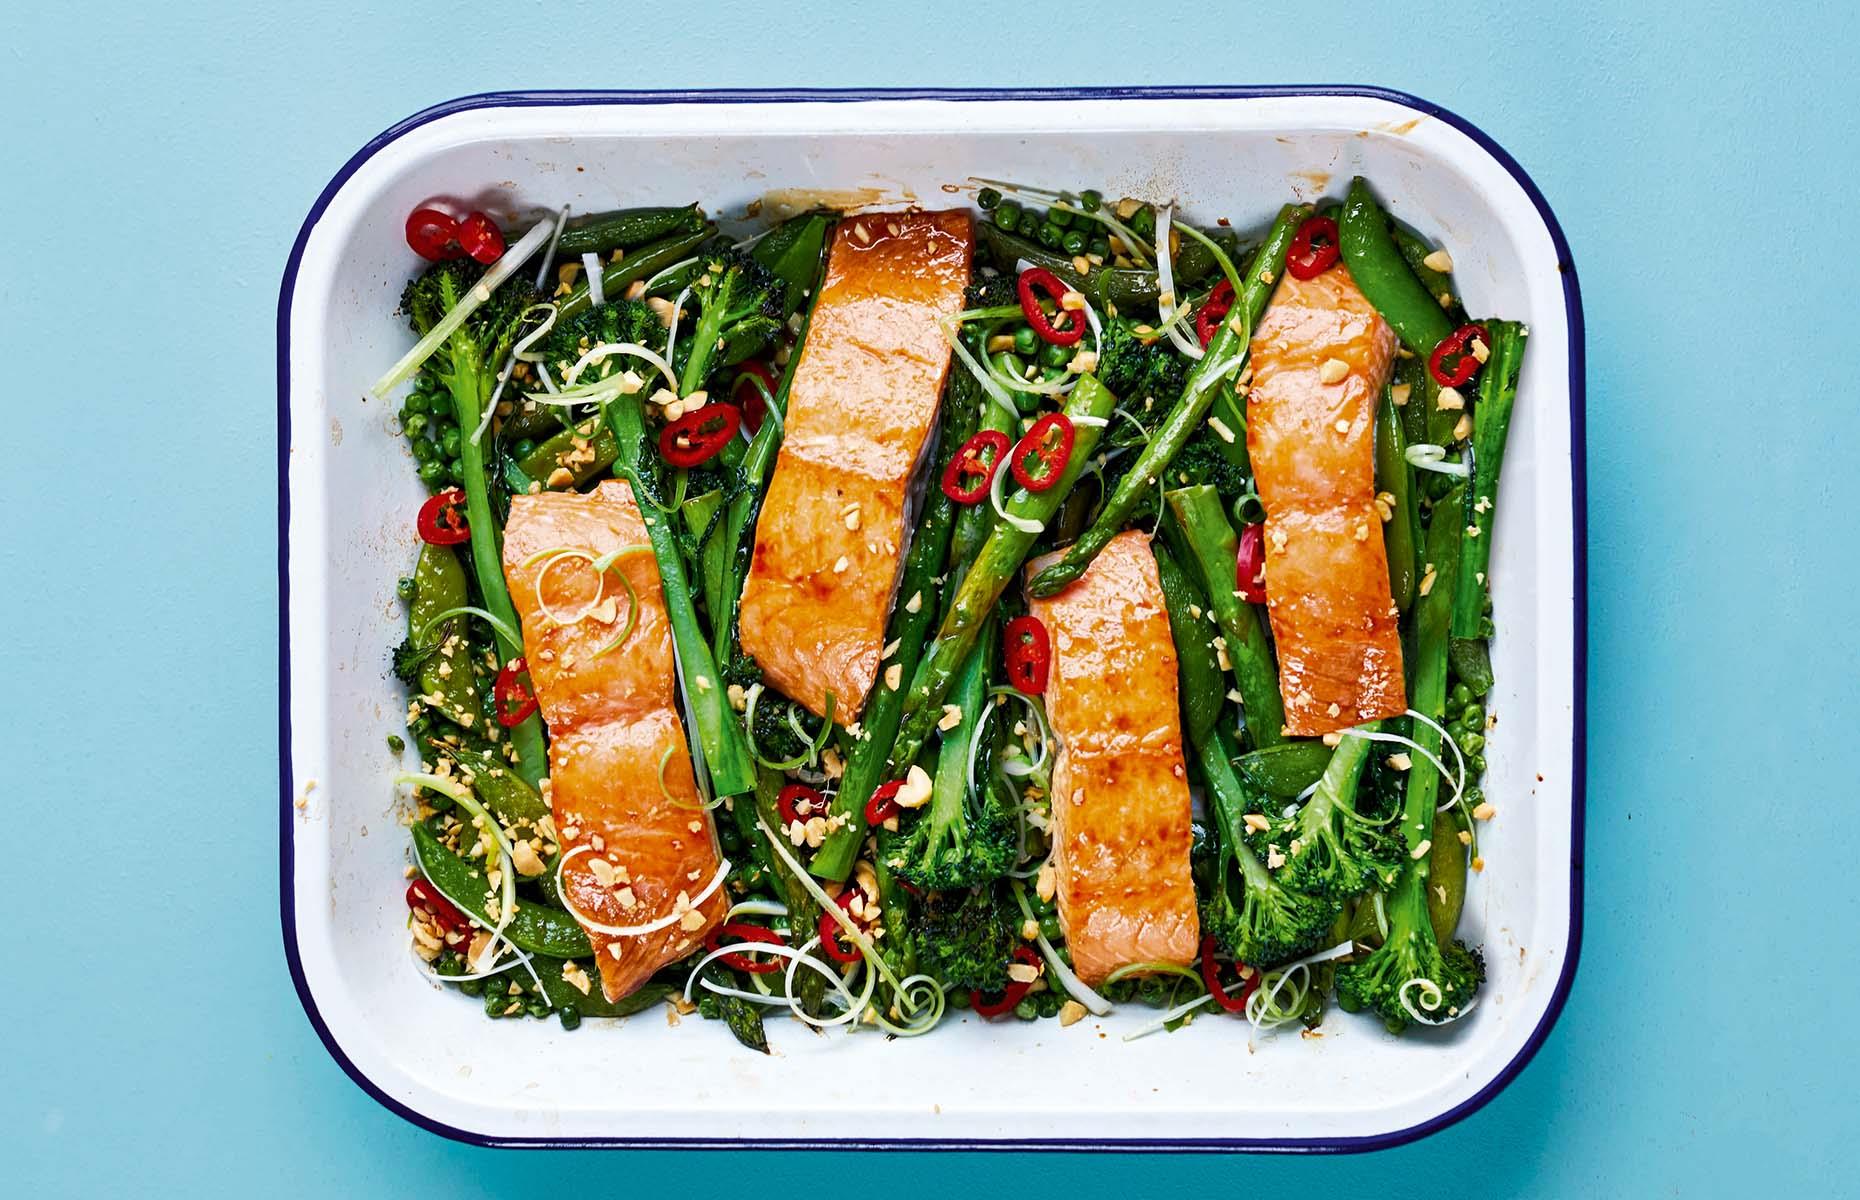 Tasty one tray meals that are quick and easy